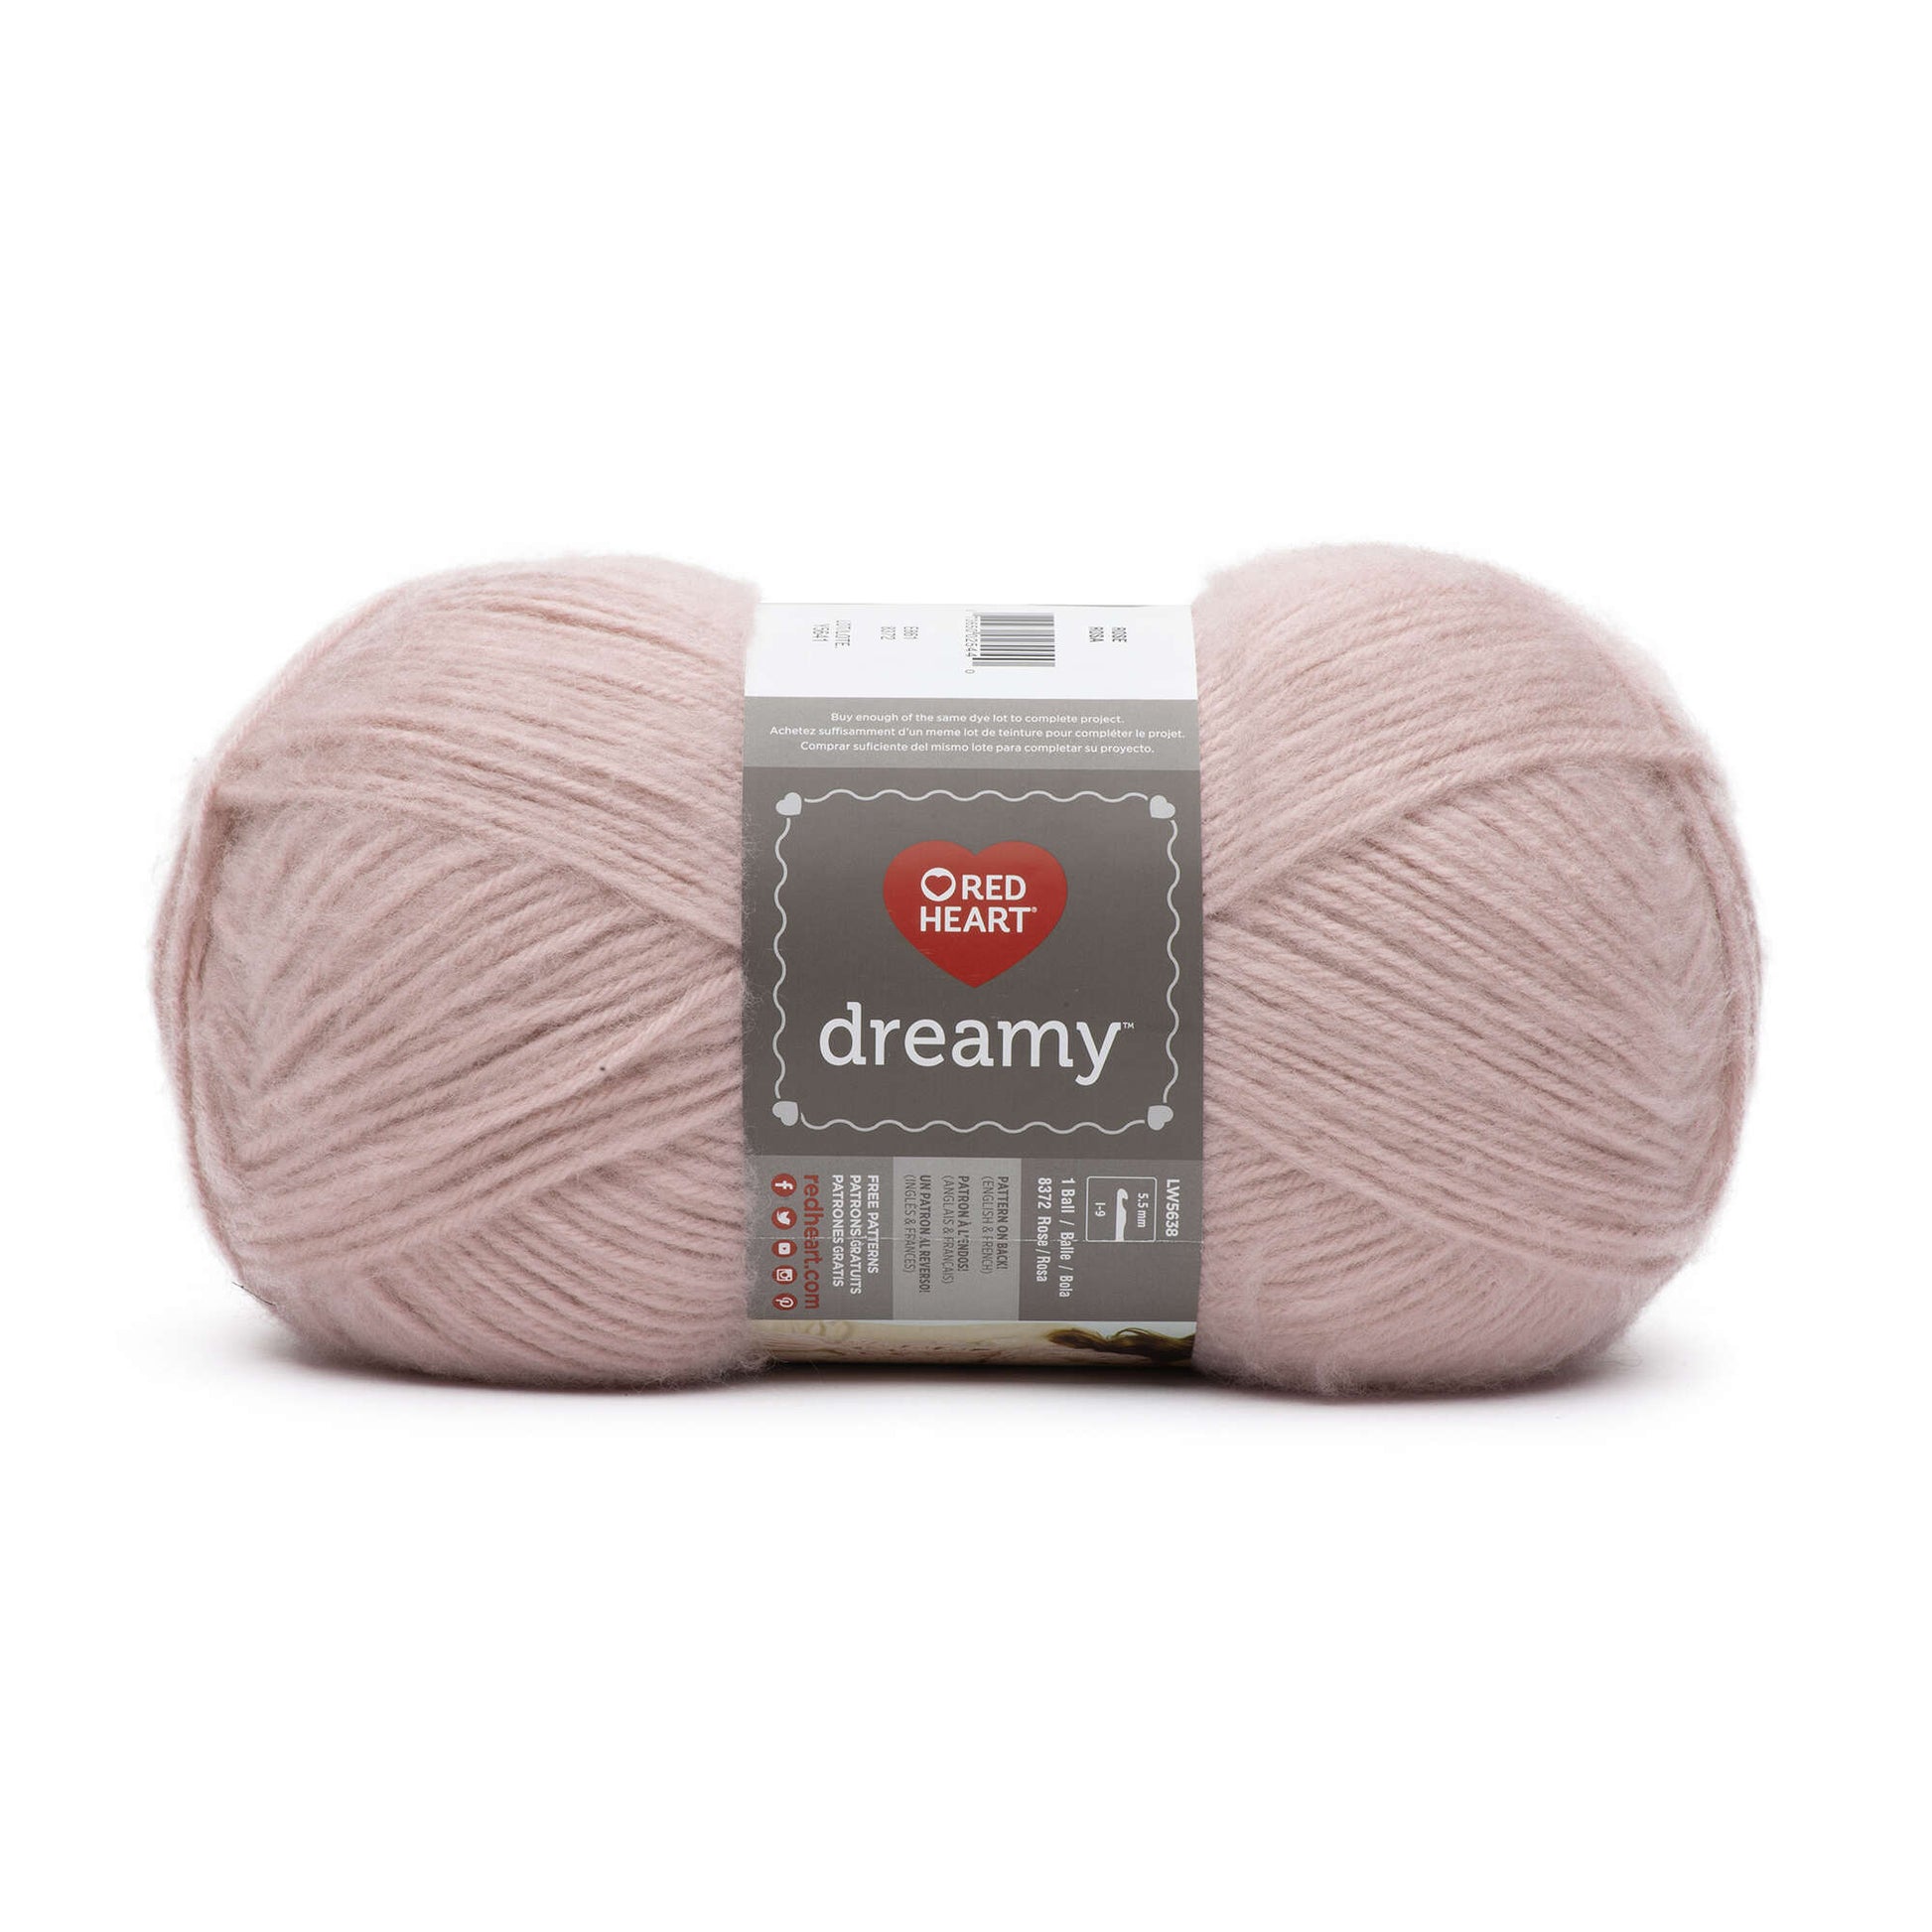 Red Heart Dreamy Yarn - Discontinued Shades